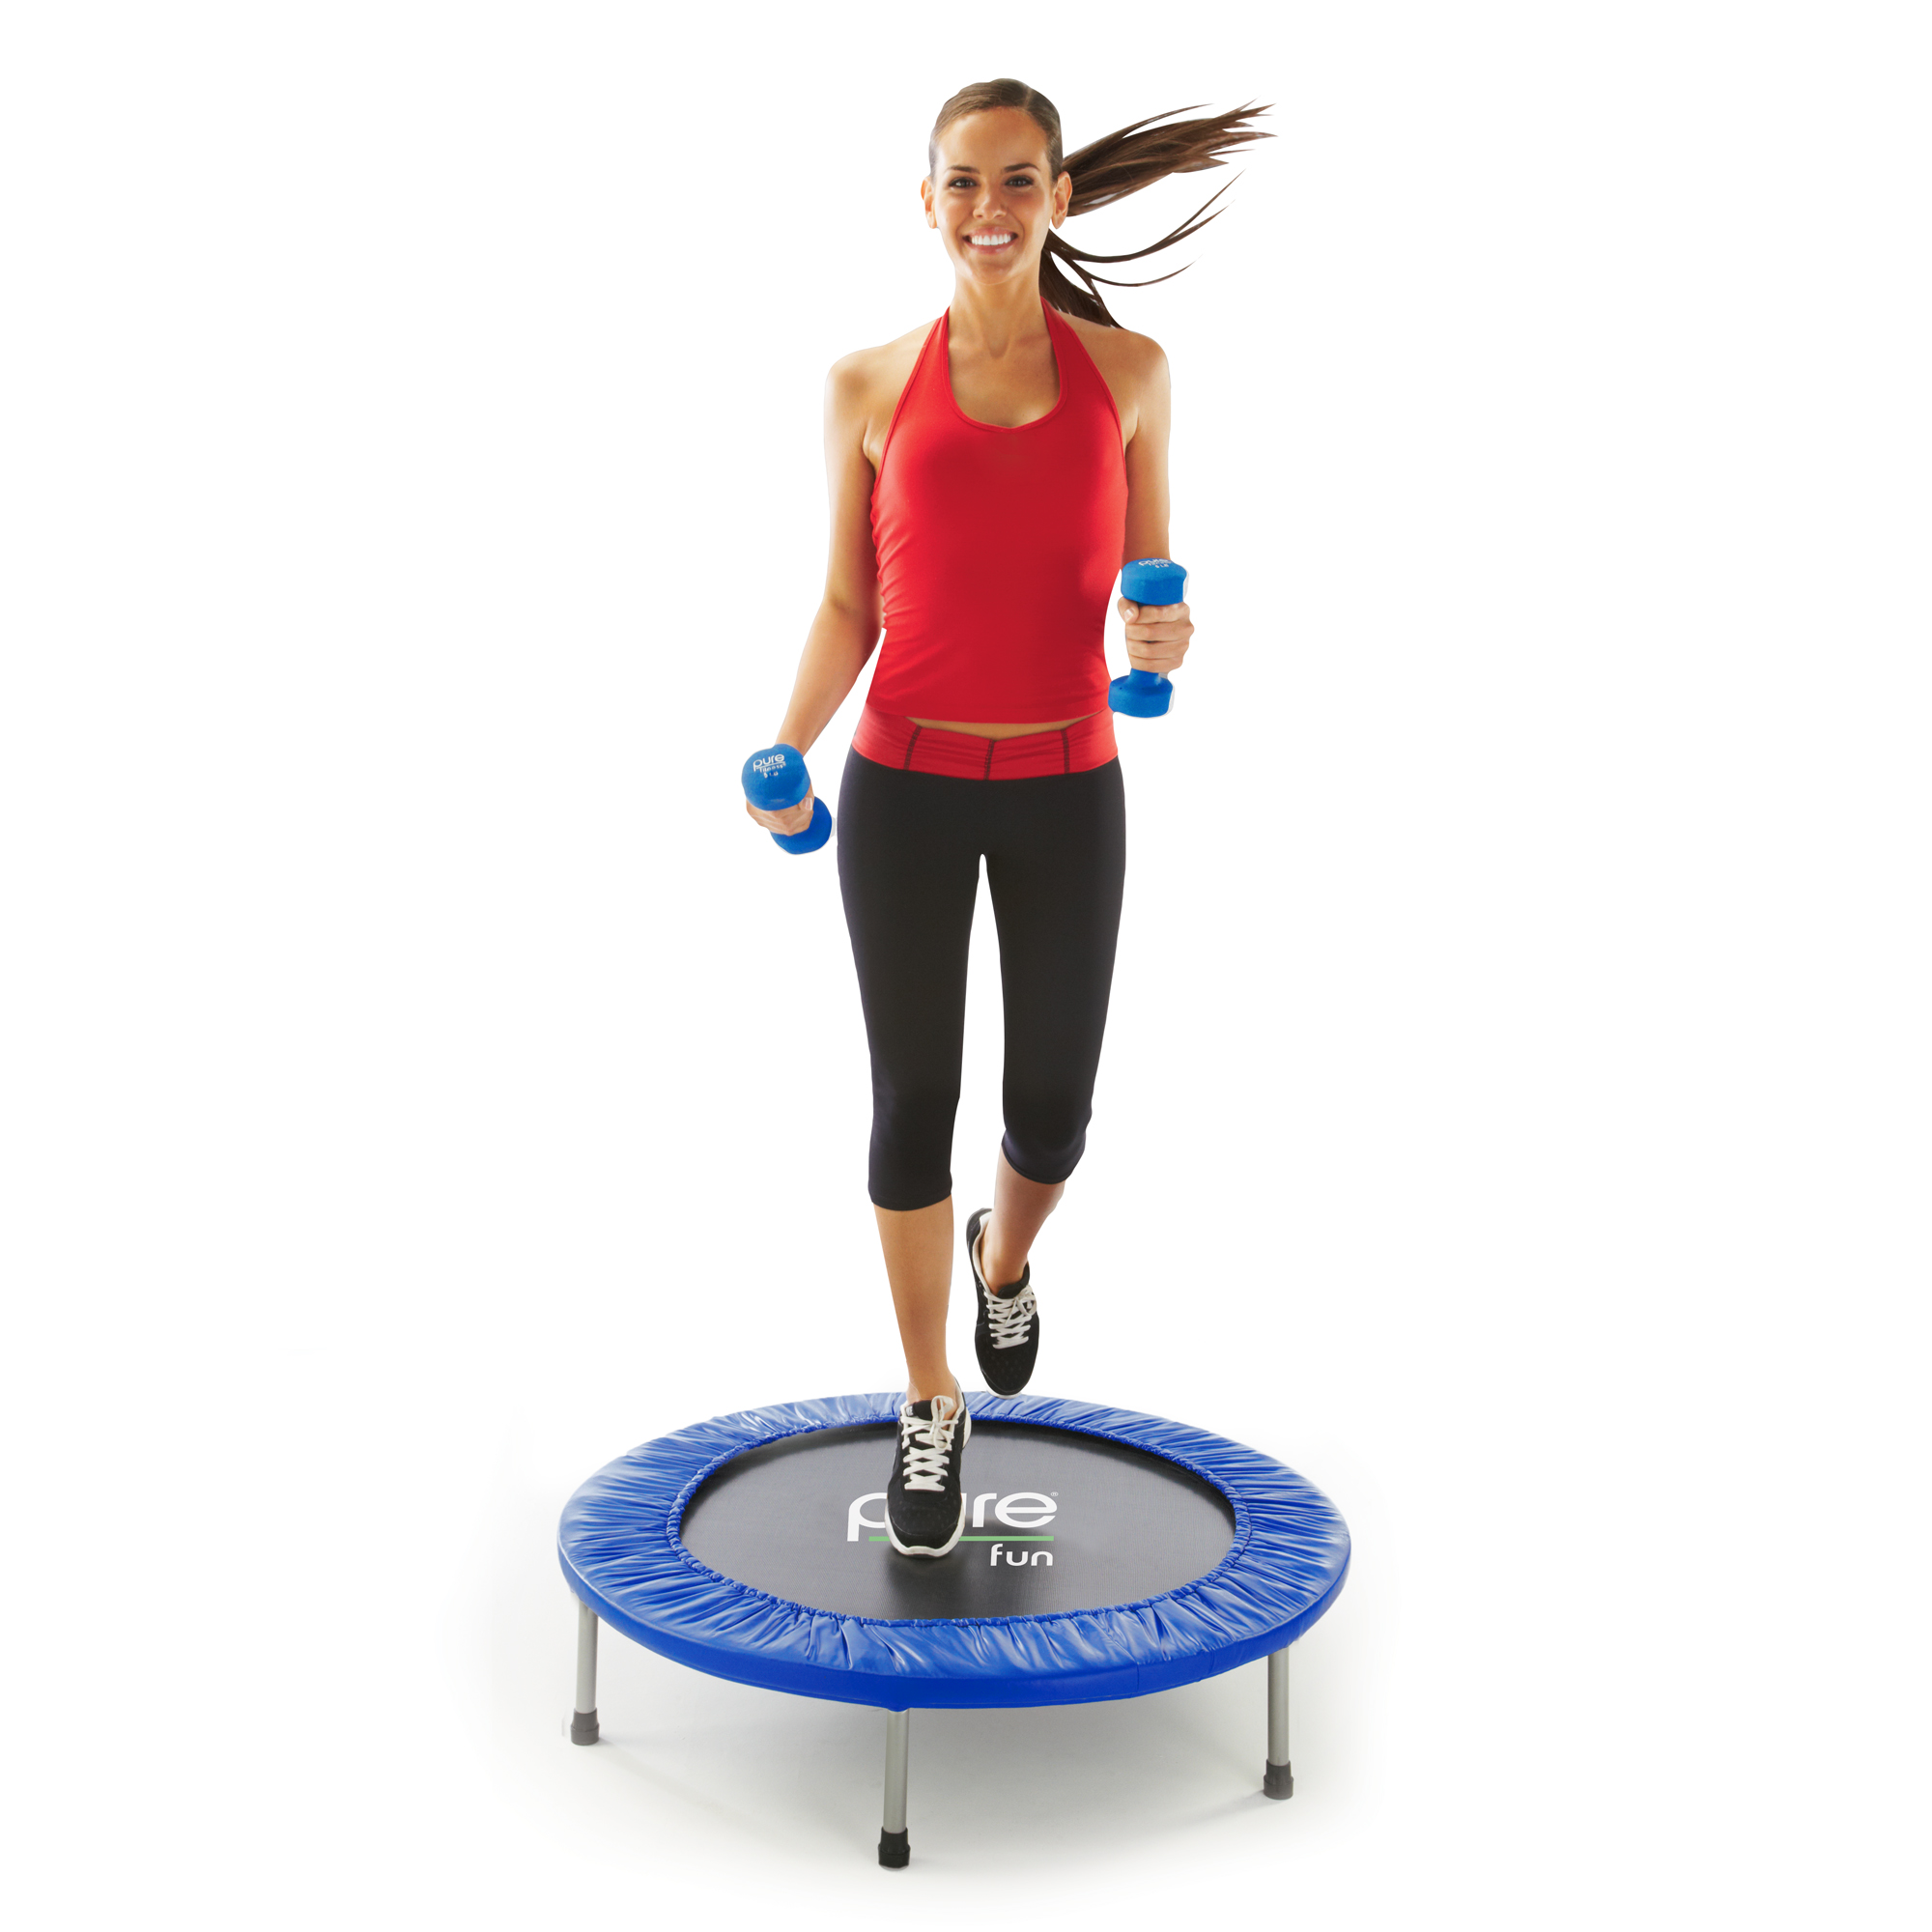 Pure Fun 38-Inch Mini Exercise Trampoline, Rebounder, 250lb Weight Limit - image 1 of 7